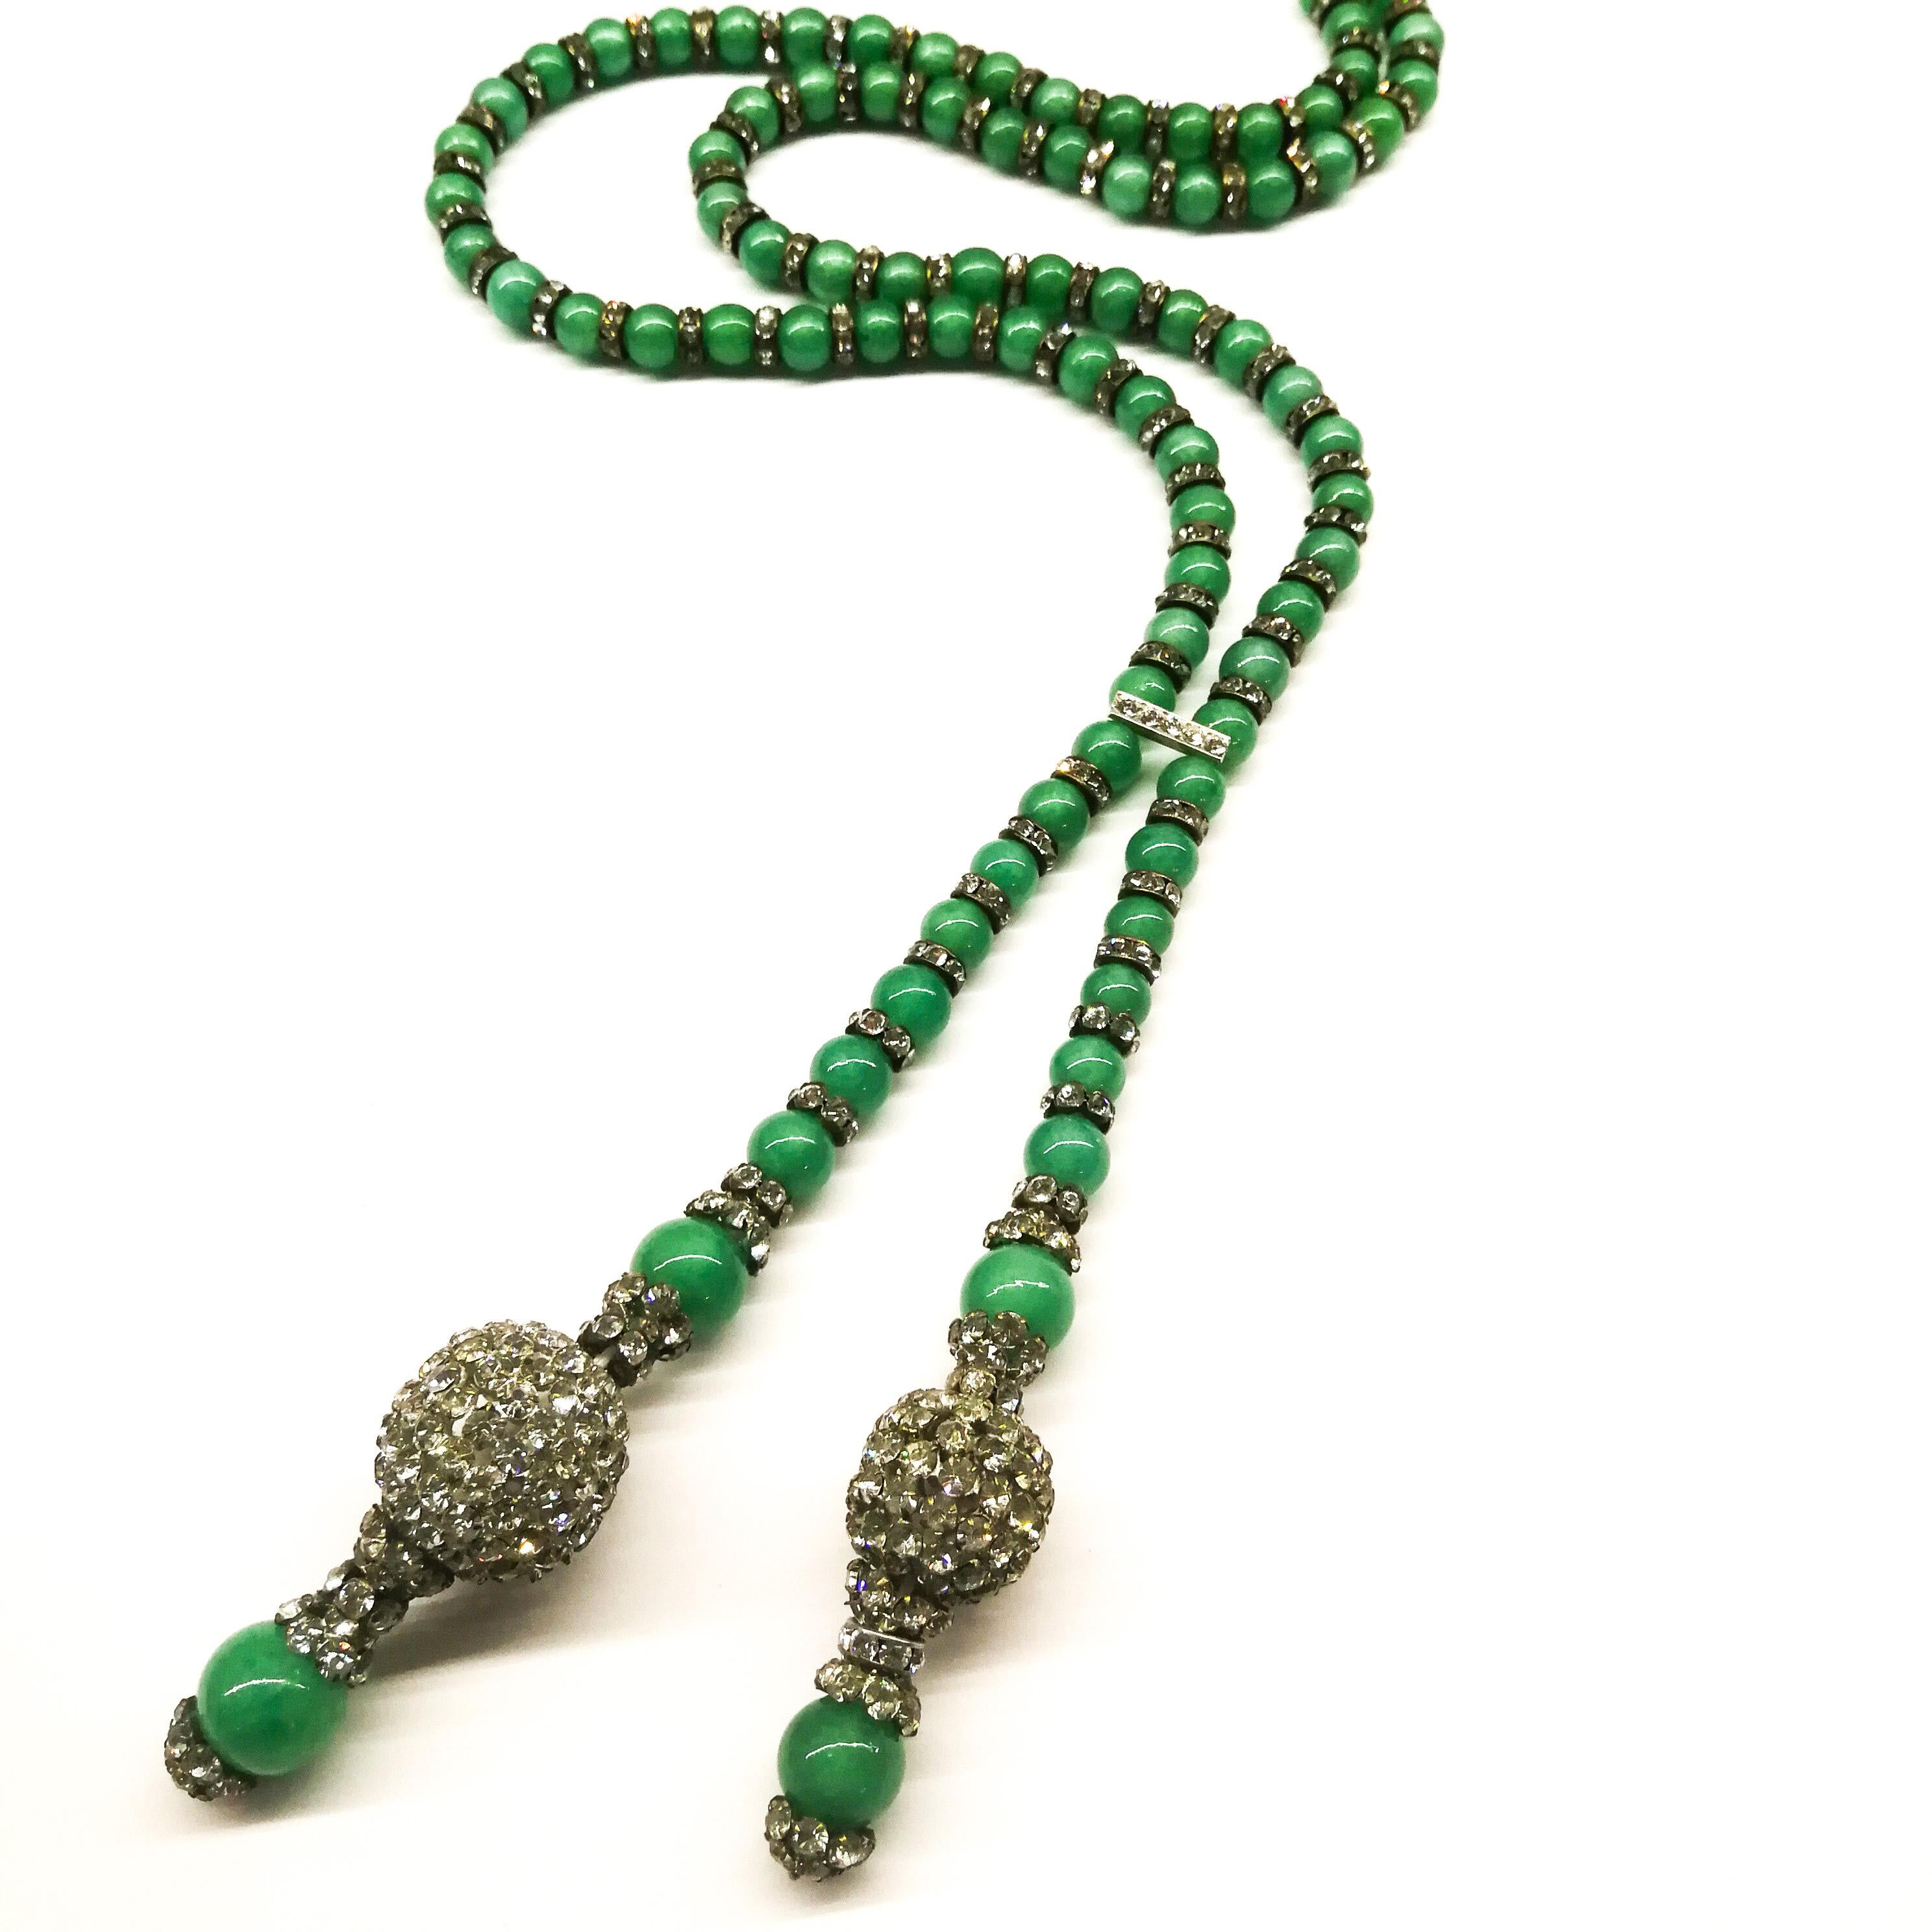 An elegant and eye catching long sautoir, in a soft 'jade' green, from France, in the 1920s. Made from imitation jade glass round beads, and clear paste rondelles, caps and balls, it is gently 'drawn together' by a paste bar, allowing the two drops